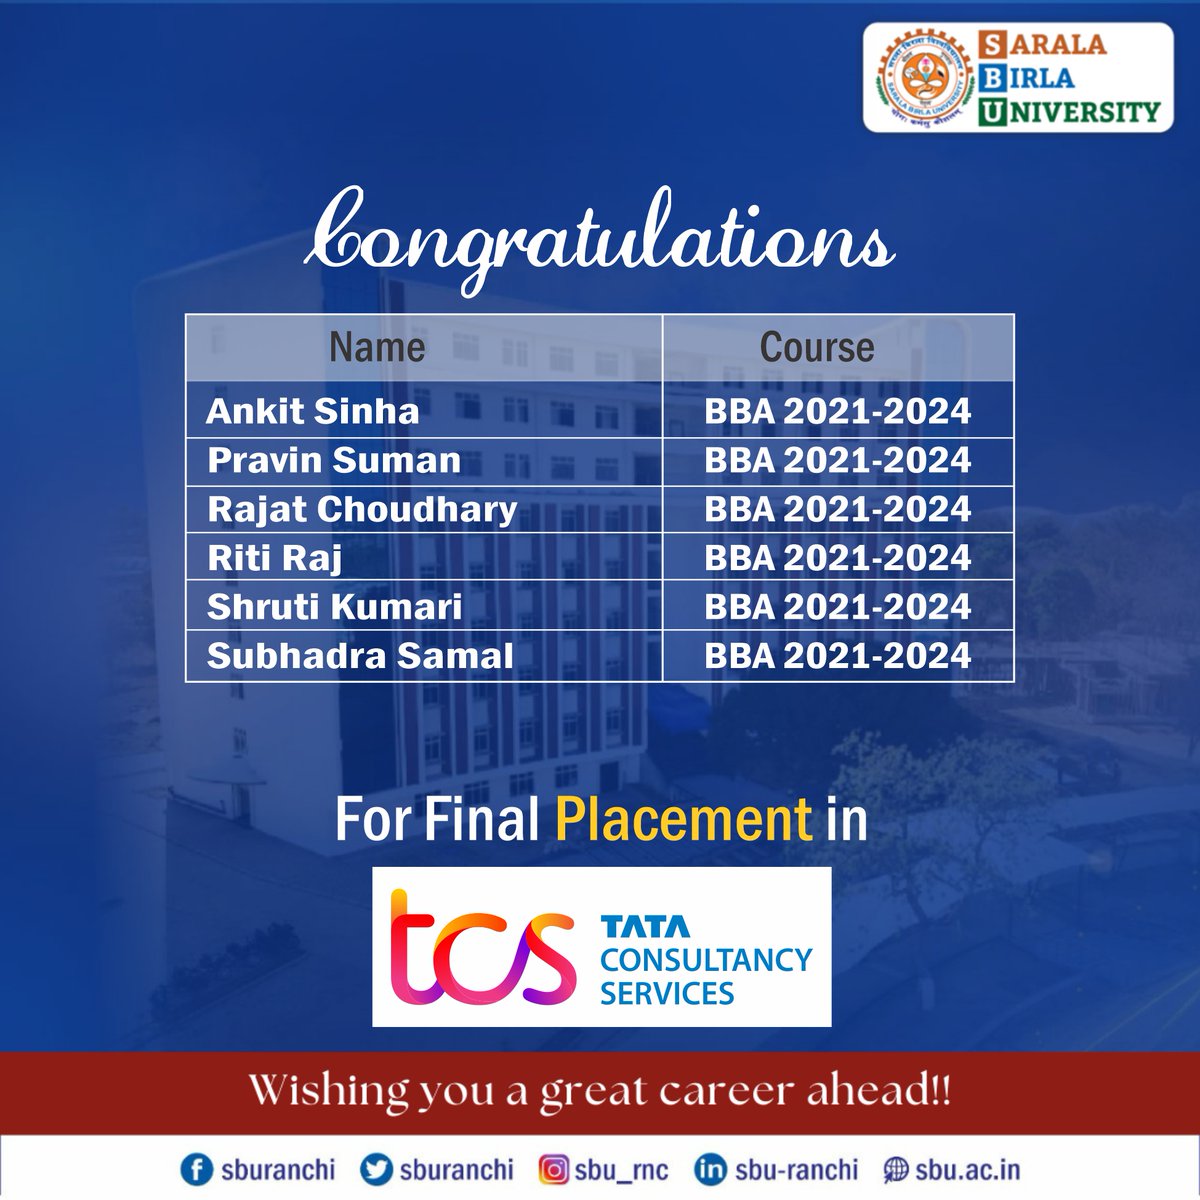 Congratulations to all selected candidates from BBA 2024 passing out batch for their final placement in TCS
Wishing all a great career ahead.
#sbu #sburanchi #placementdrive #tcs